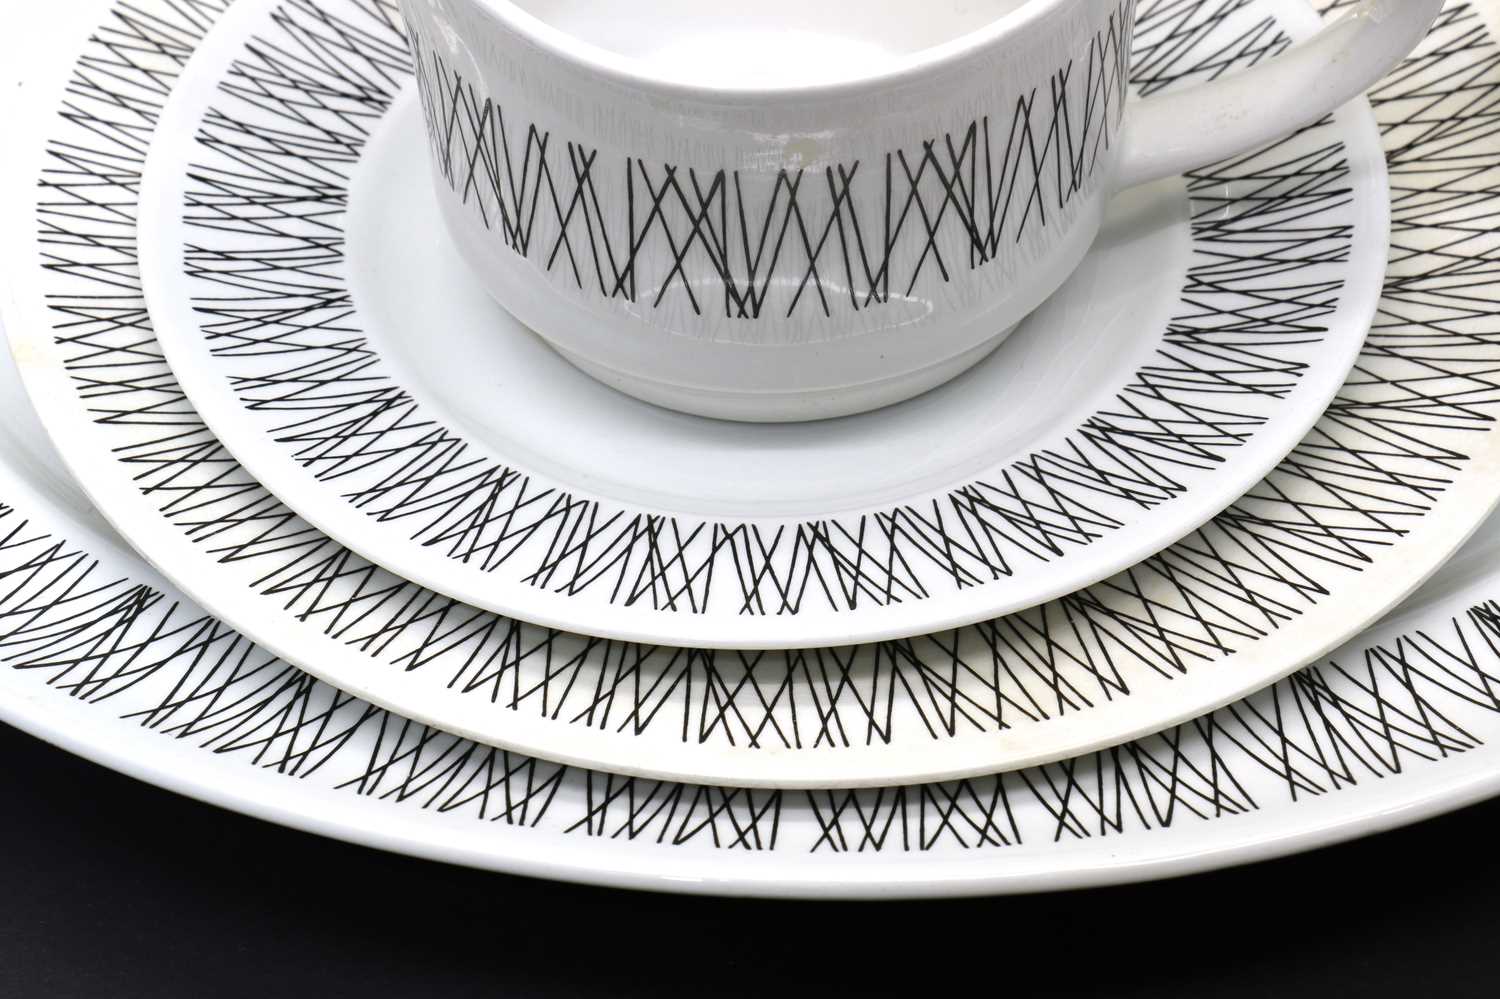 A Midwinter 'Graphic' tea, coffee and dinner service, - Image 3 of 6